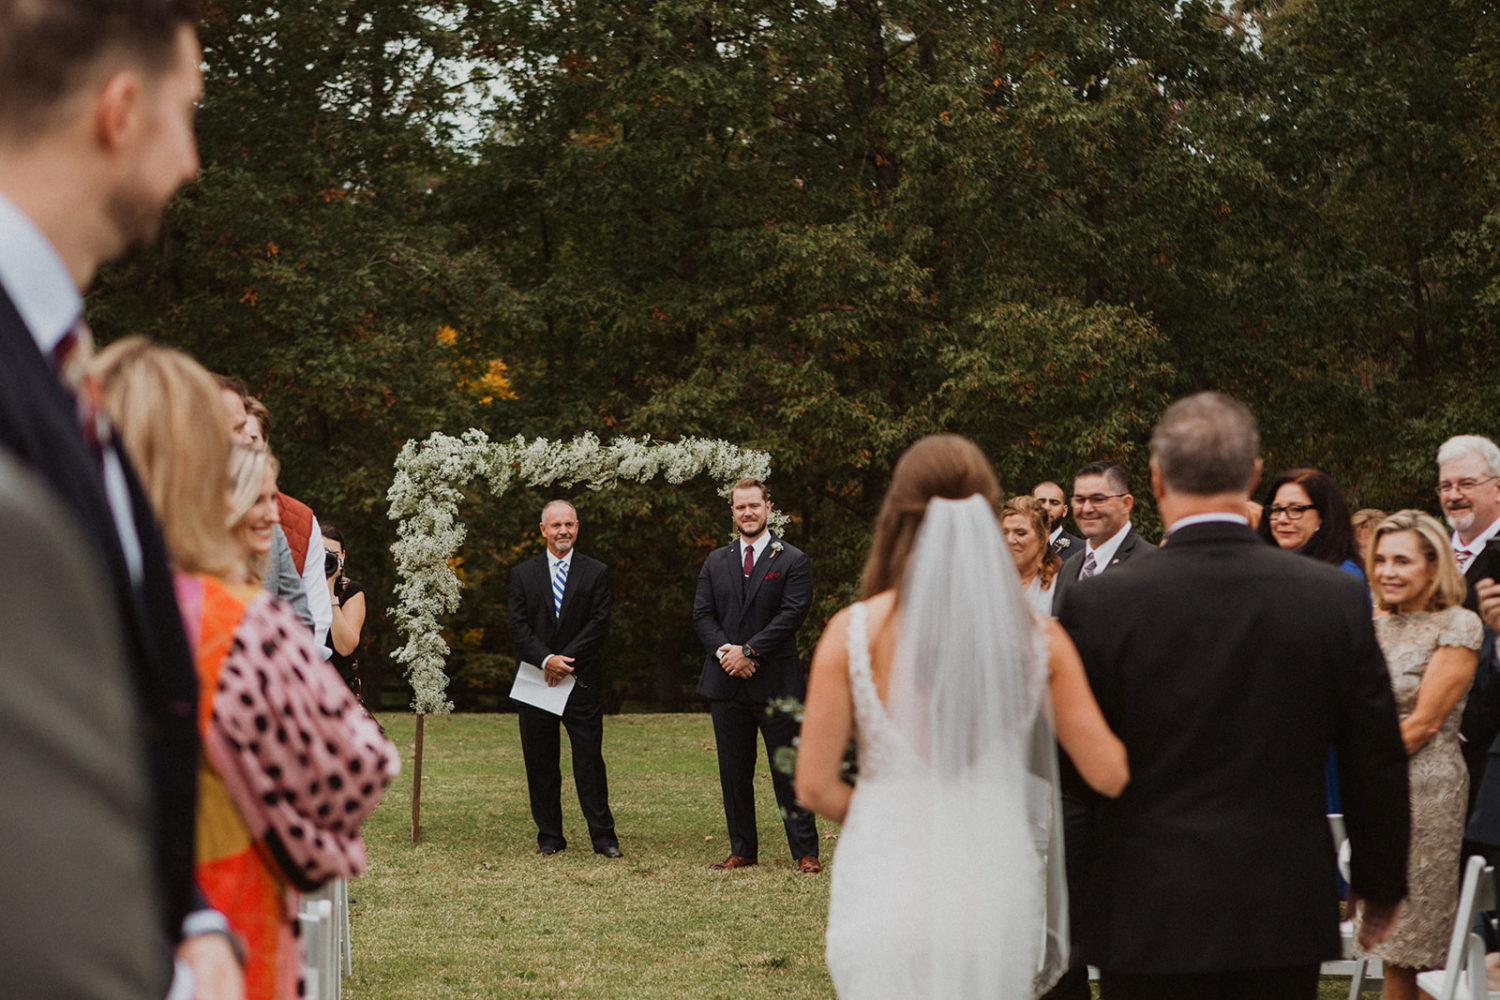 Bride walks towards groom while holding dad's arm